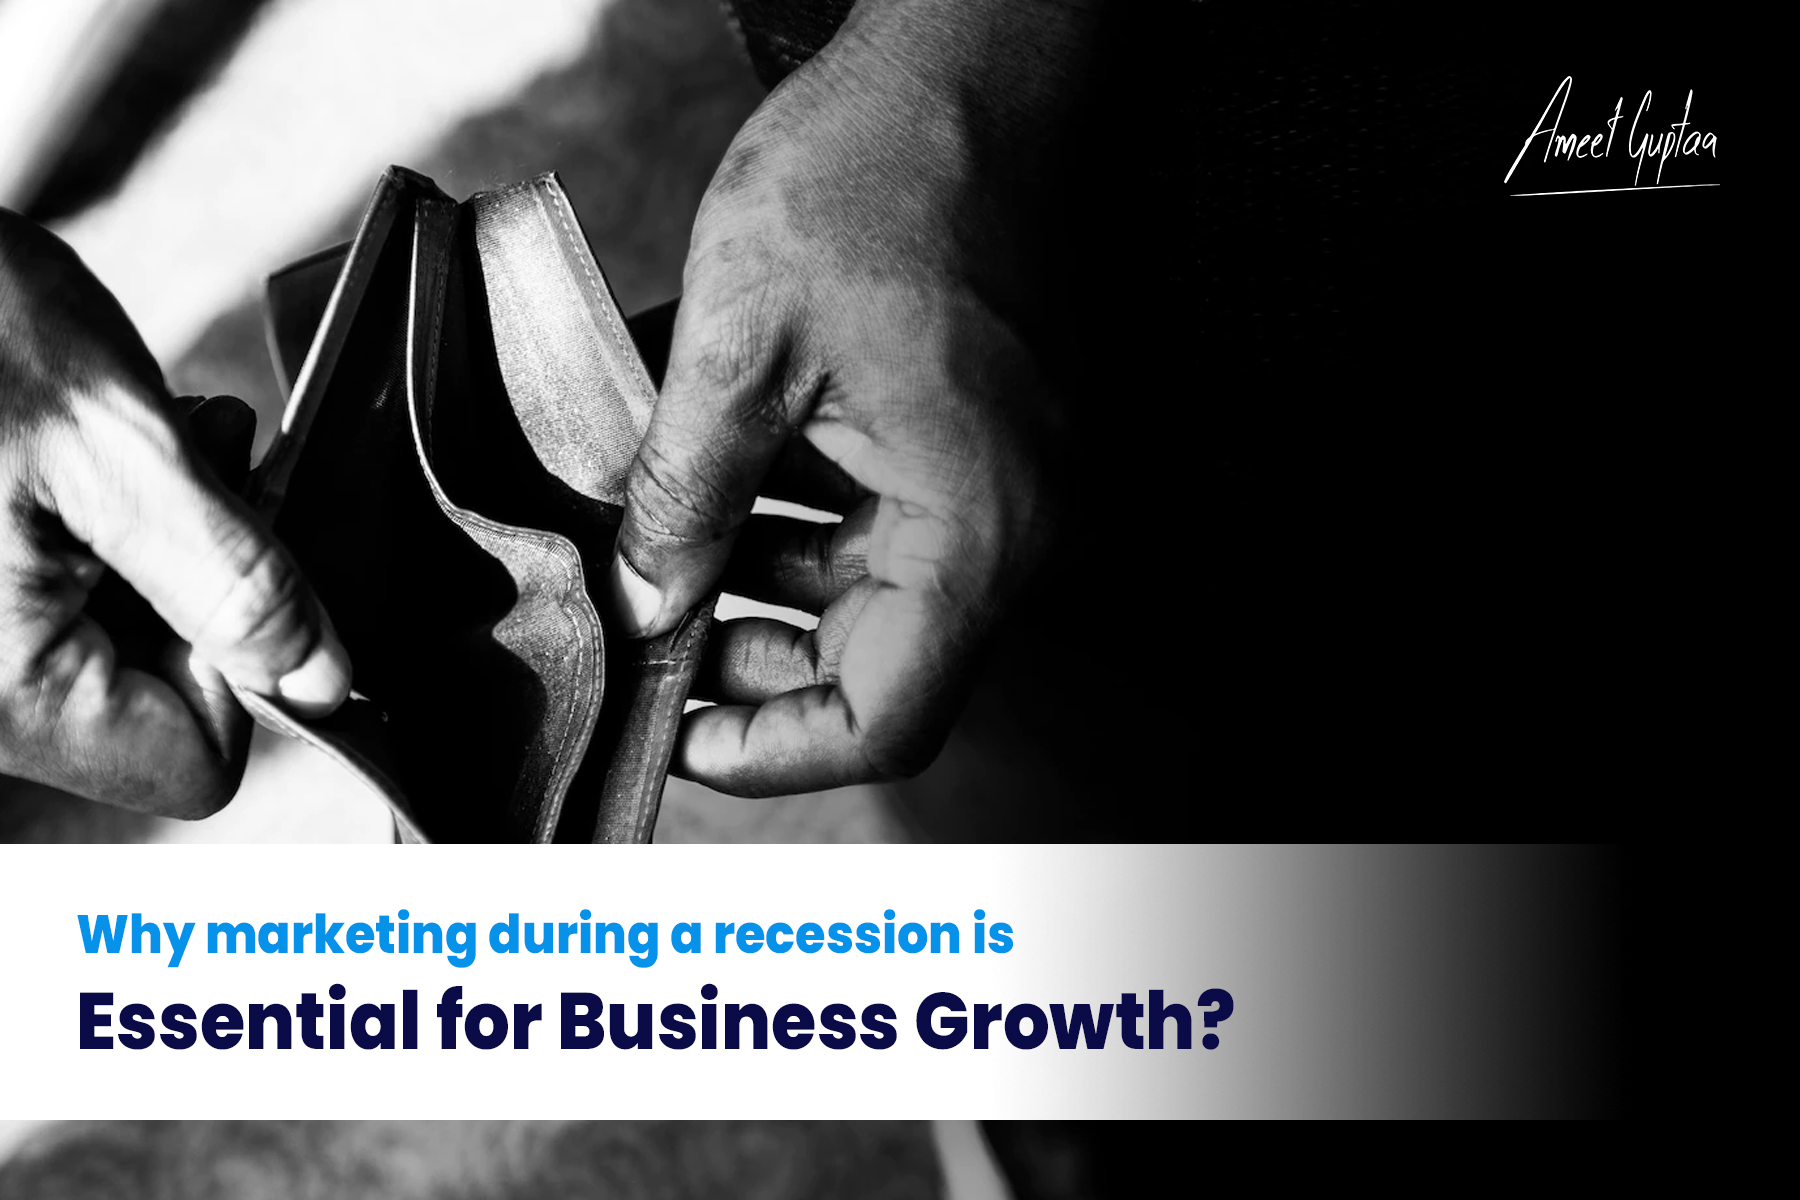 why-marketing-during-a-recession-is-essential-for-business-growth-AmeetGuptaa